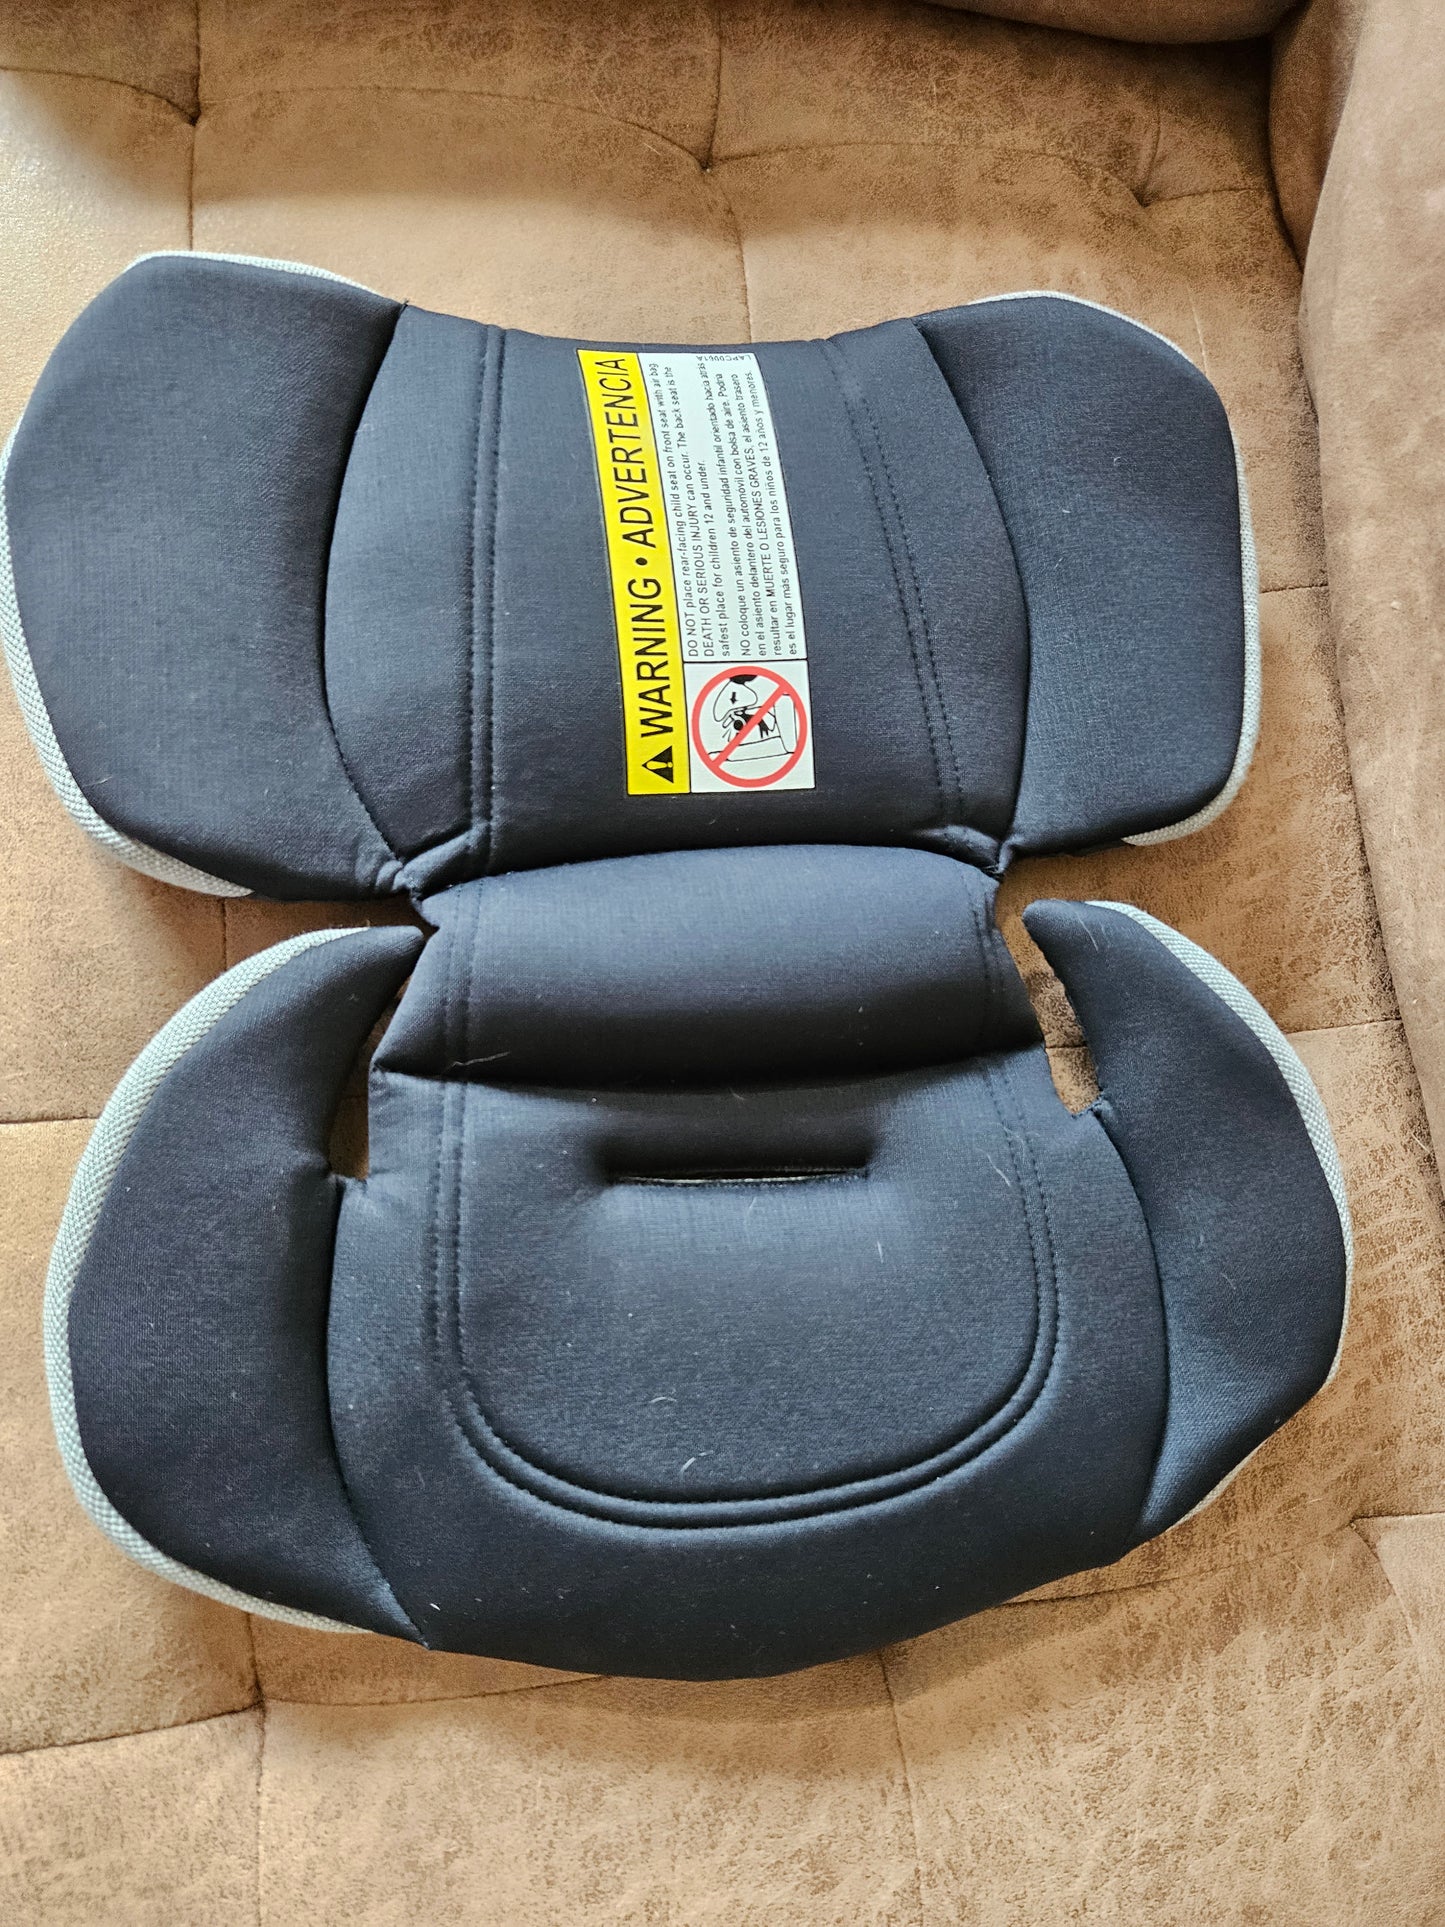 Evenflo Infant Carseat with base. Purchased 2020. No accidents.